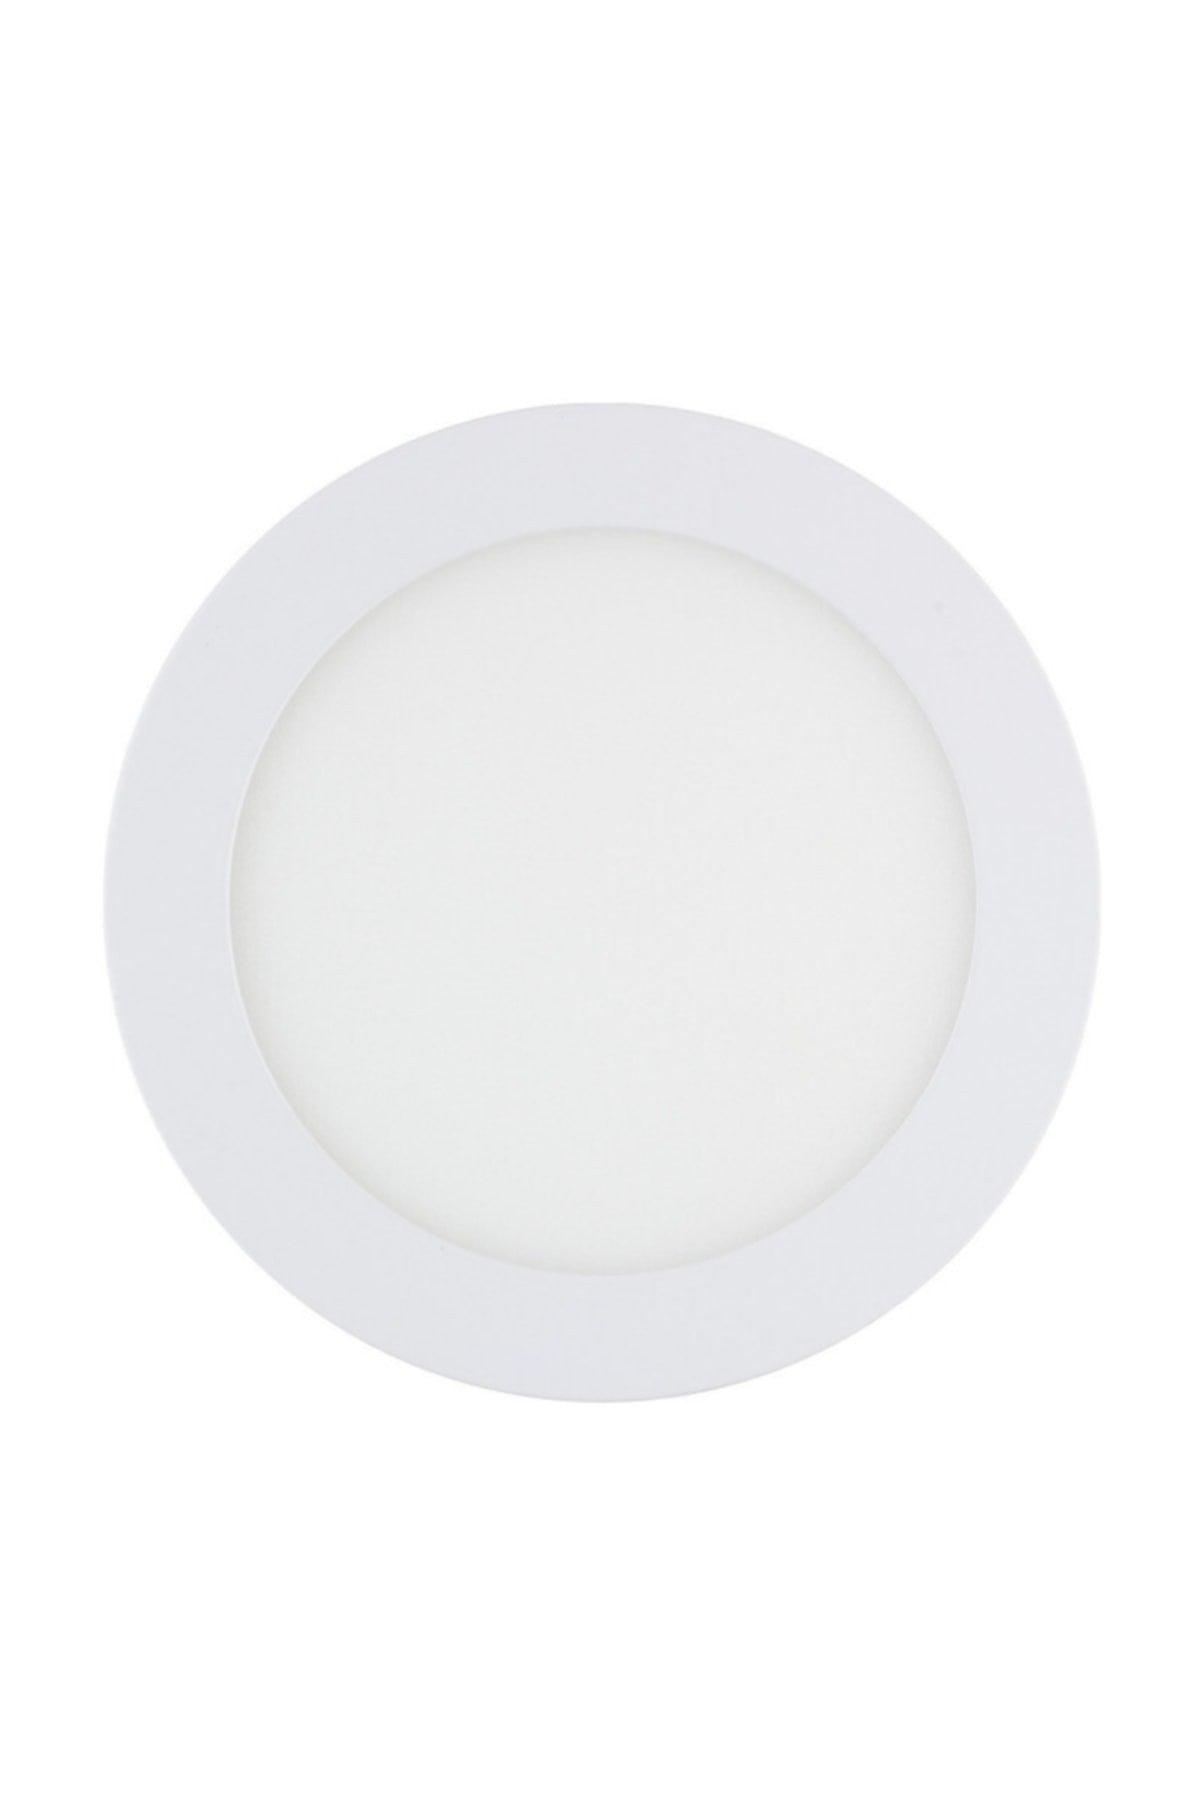 6w Recessed Led Panel Deluxe White(5pcs)